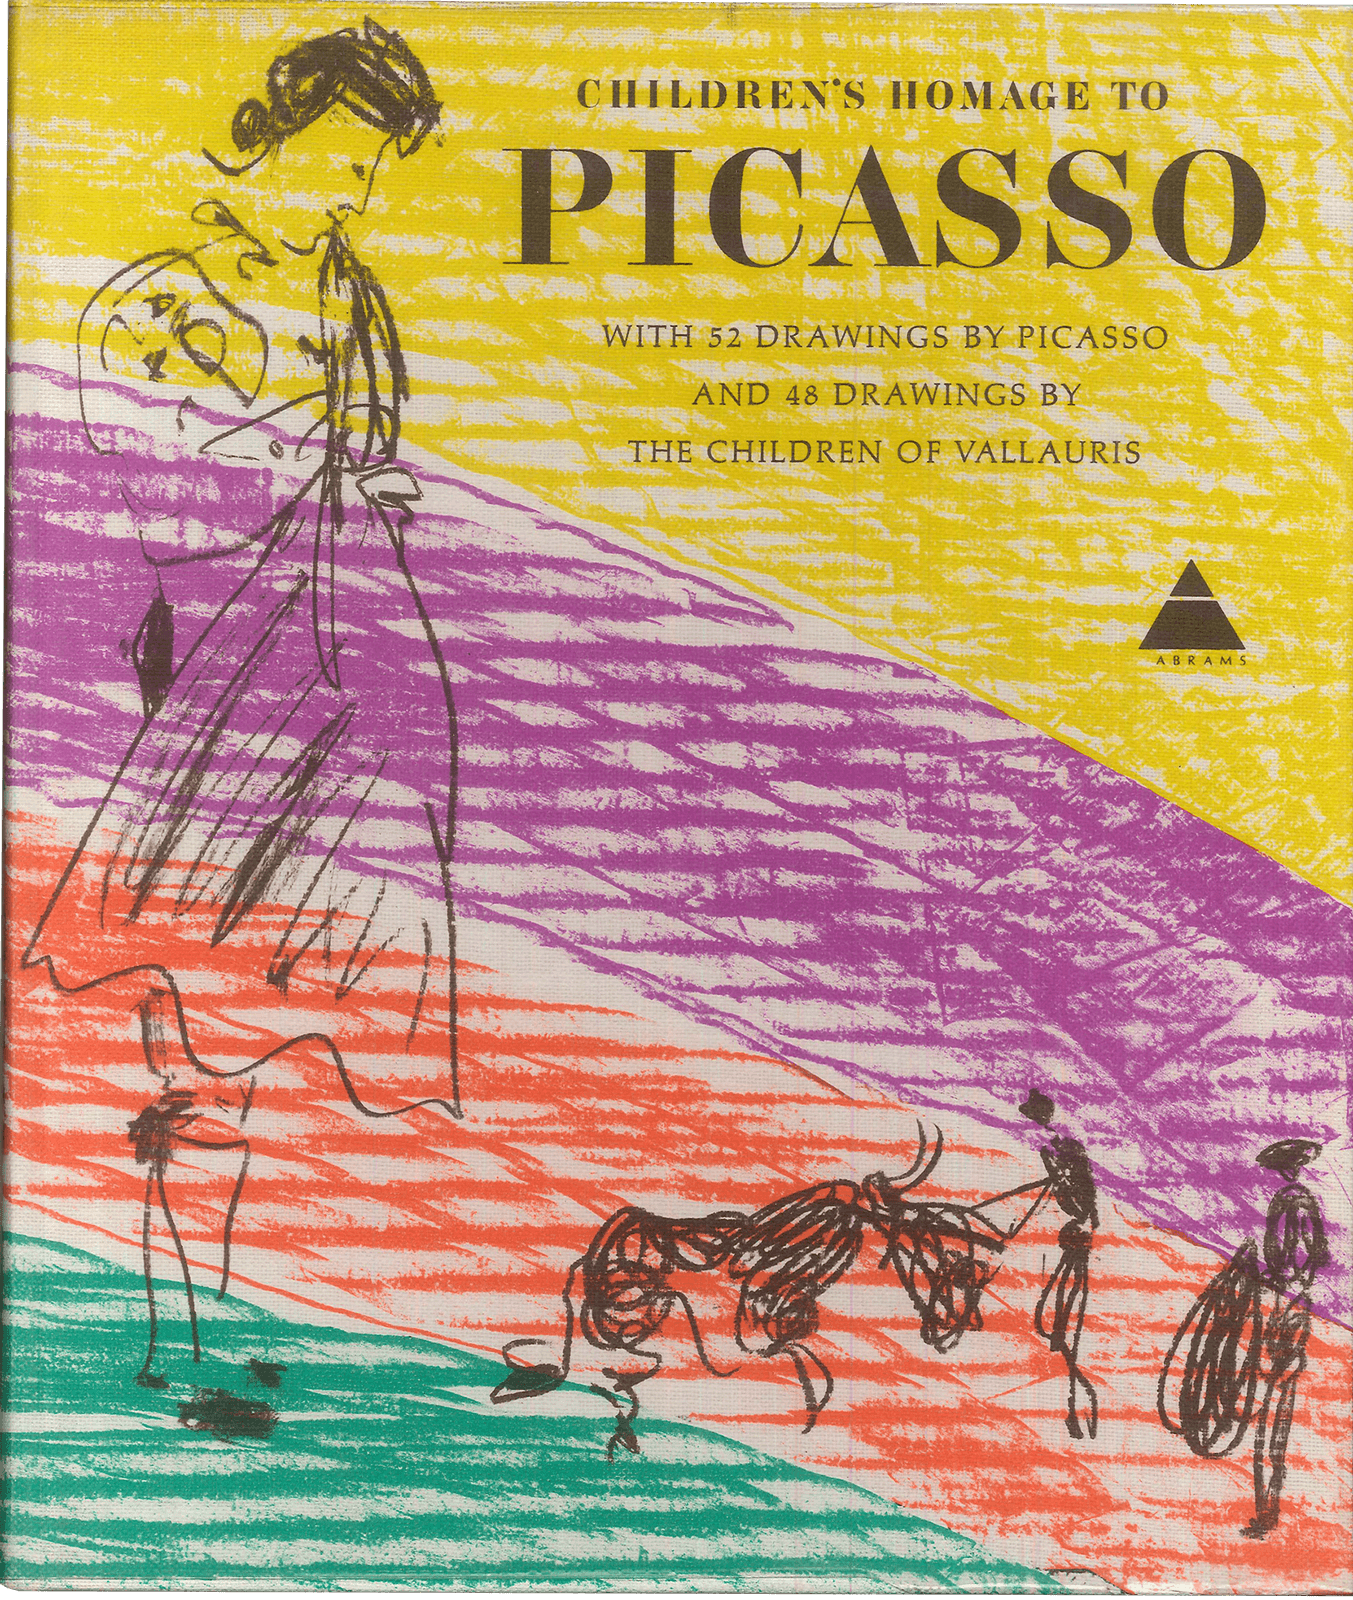 “Children’s Homage to Picasso,” 1970